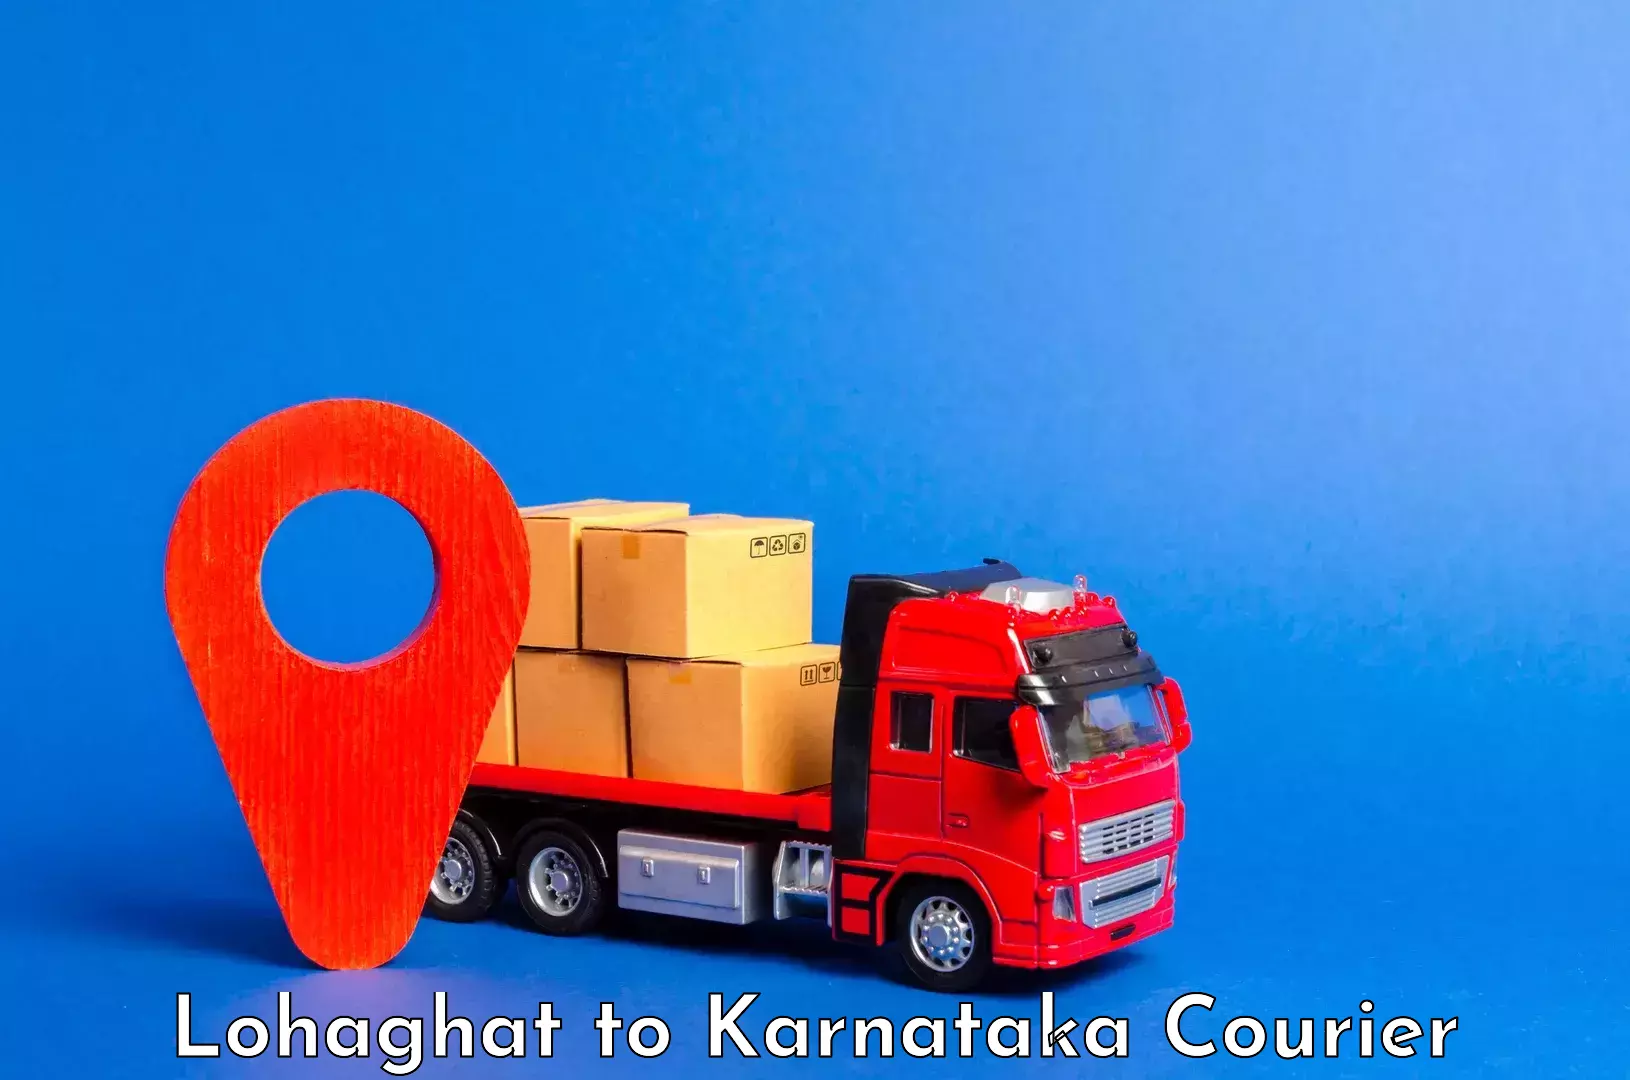 Luggage transport consultancy Lohaghat to Mudhol